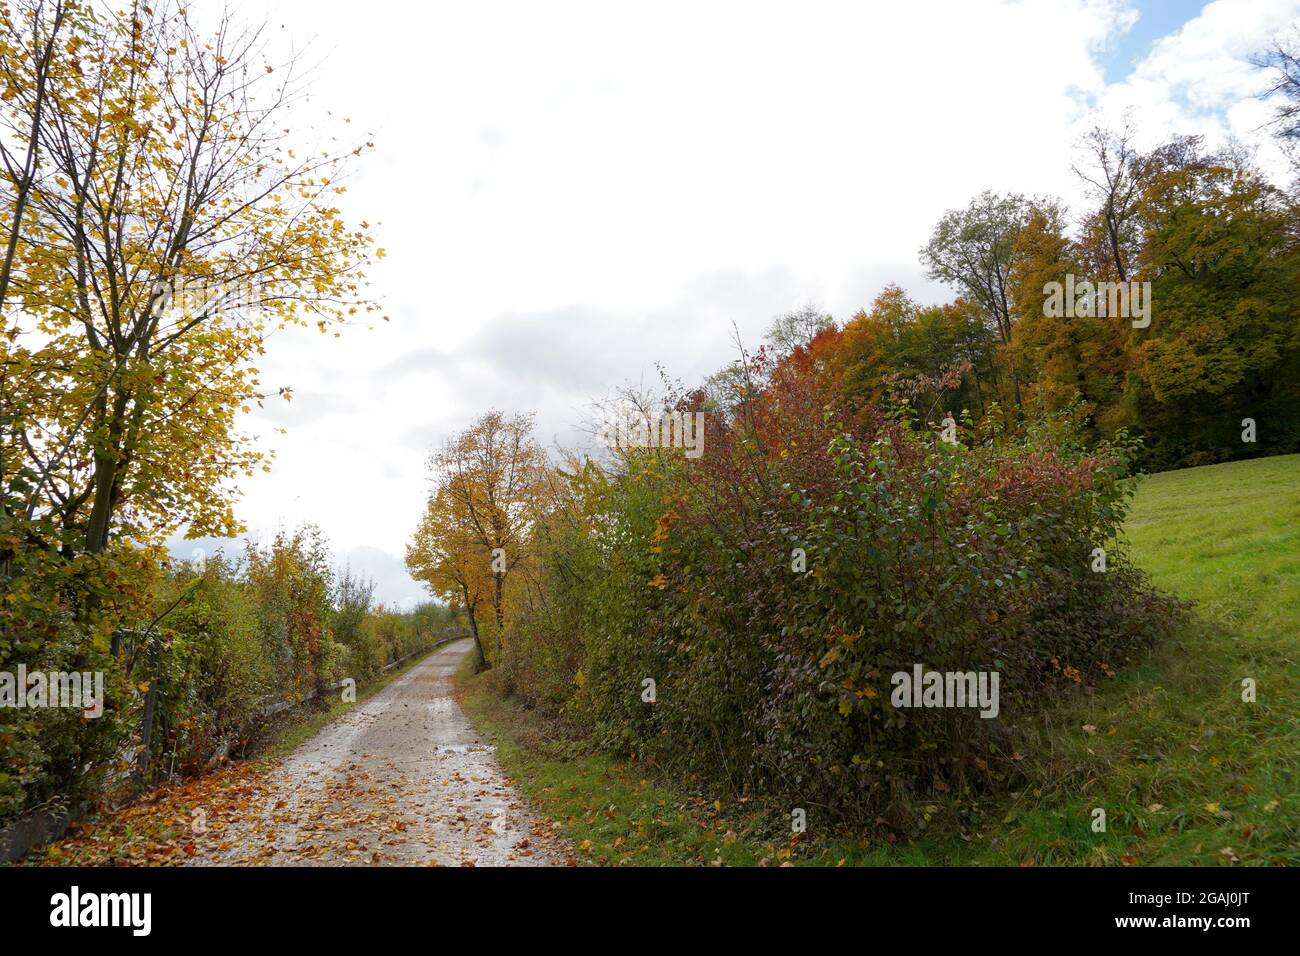 Autumn landscape with country road. The road is surrounded with trees and bushes with colorful foliage. Overcast sky with copy space is on background. Stock Photo